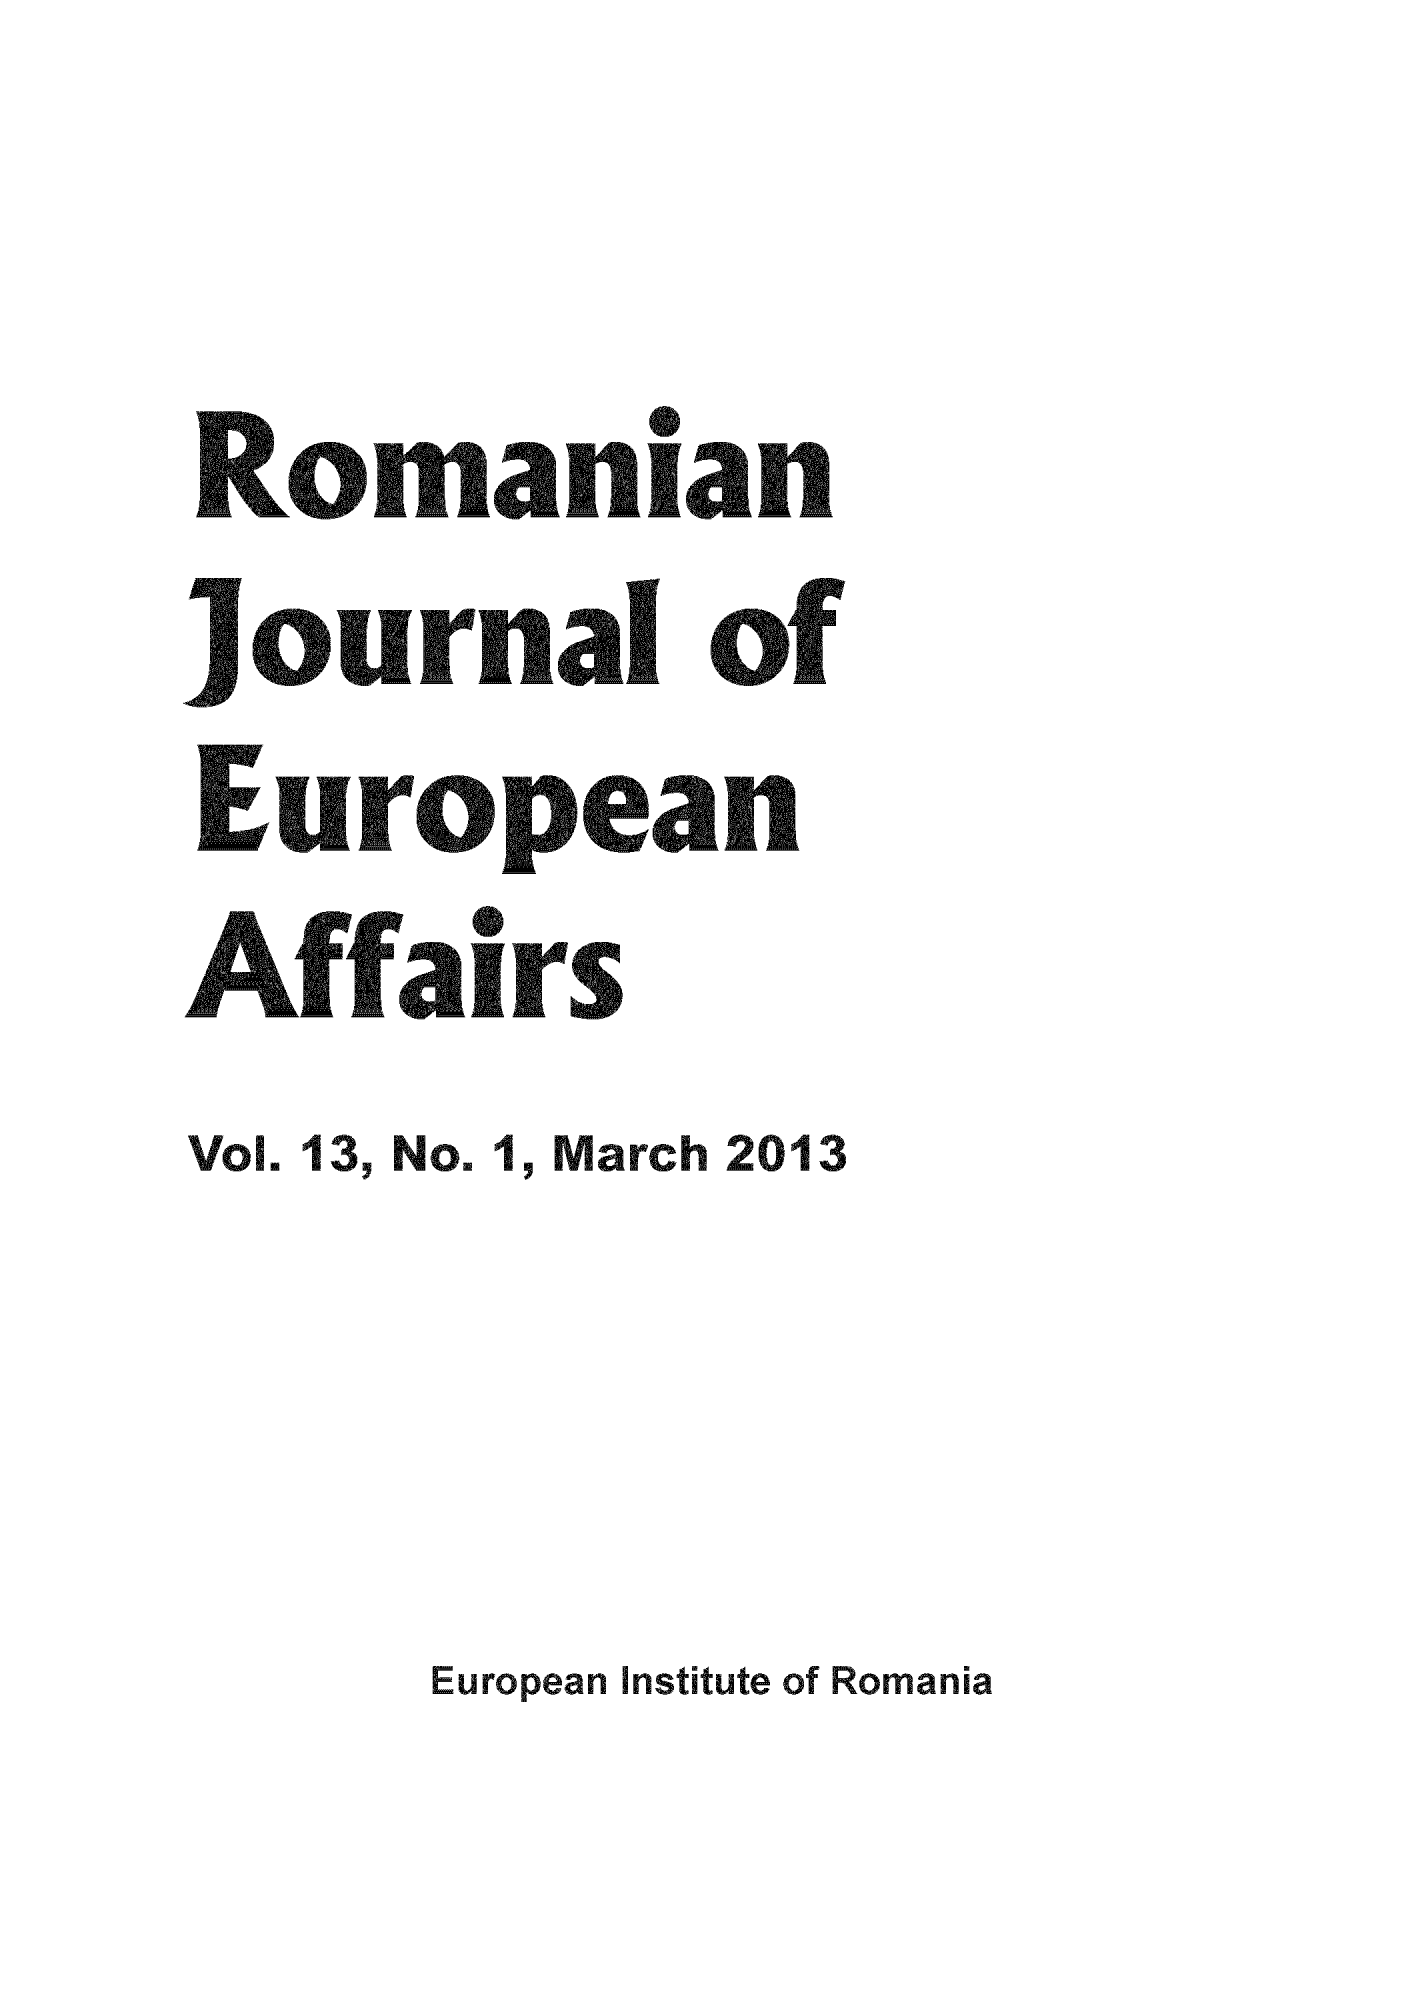 handle is hein.journals/rojaeuf13 and id is 1 raw text is: Ronianwian

Europe.an
Affairs

Vol. 13, No. 1, March 2013

European Institute of Romania


